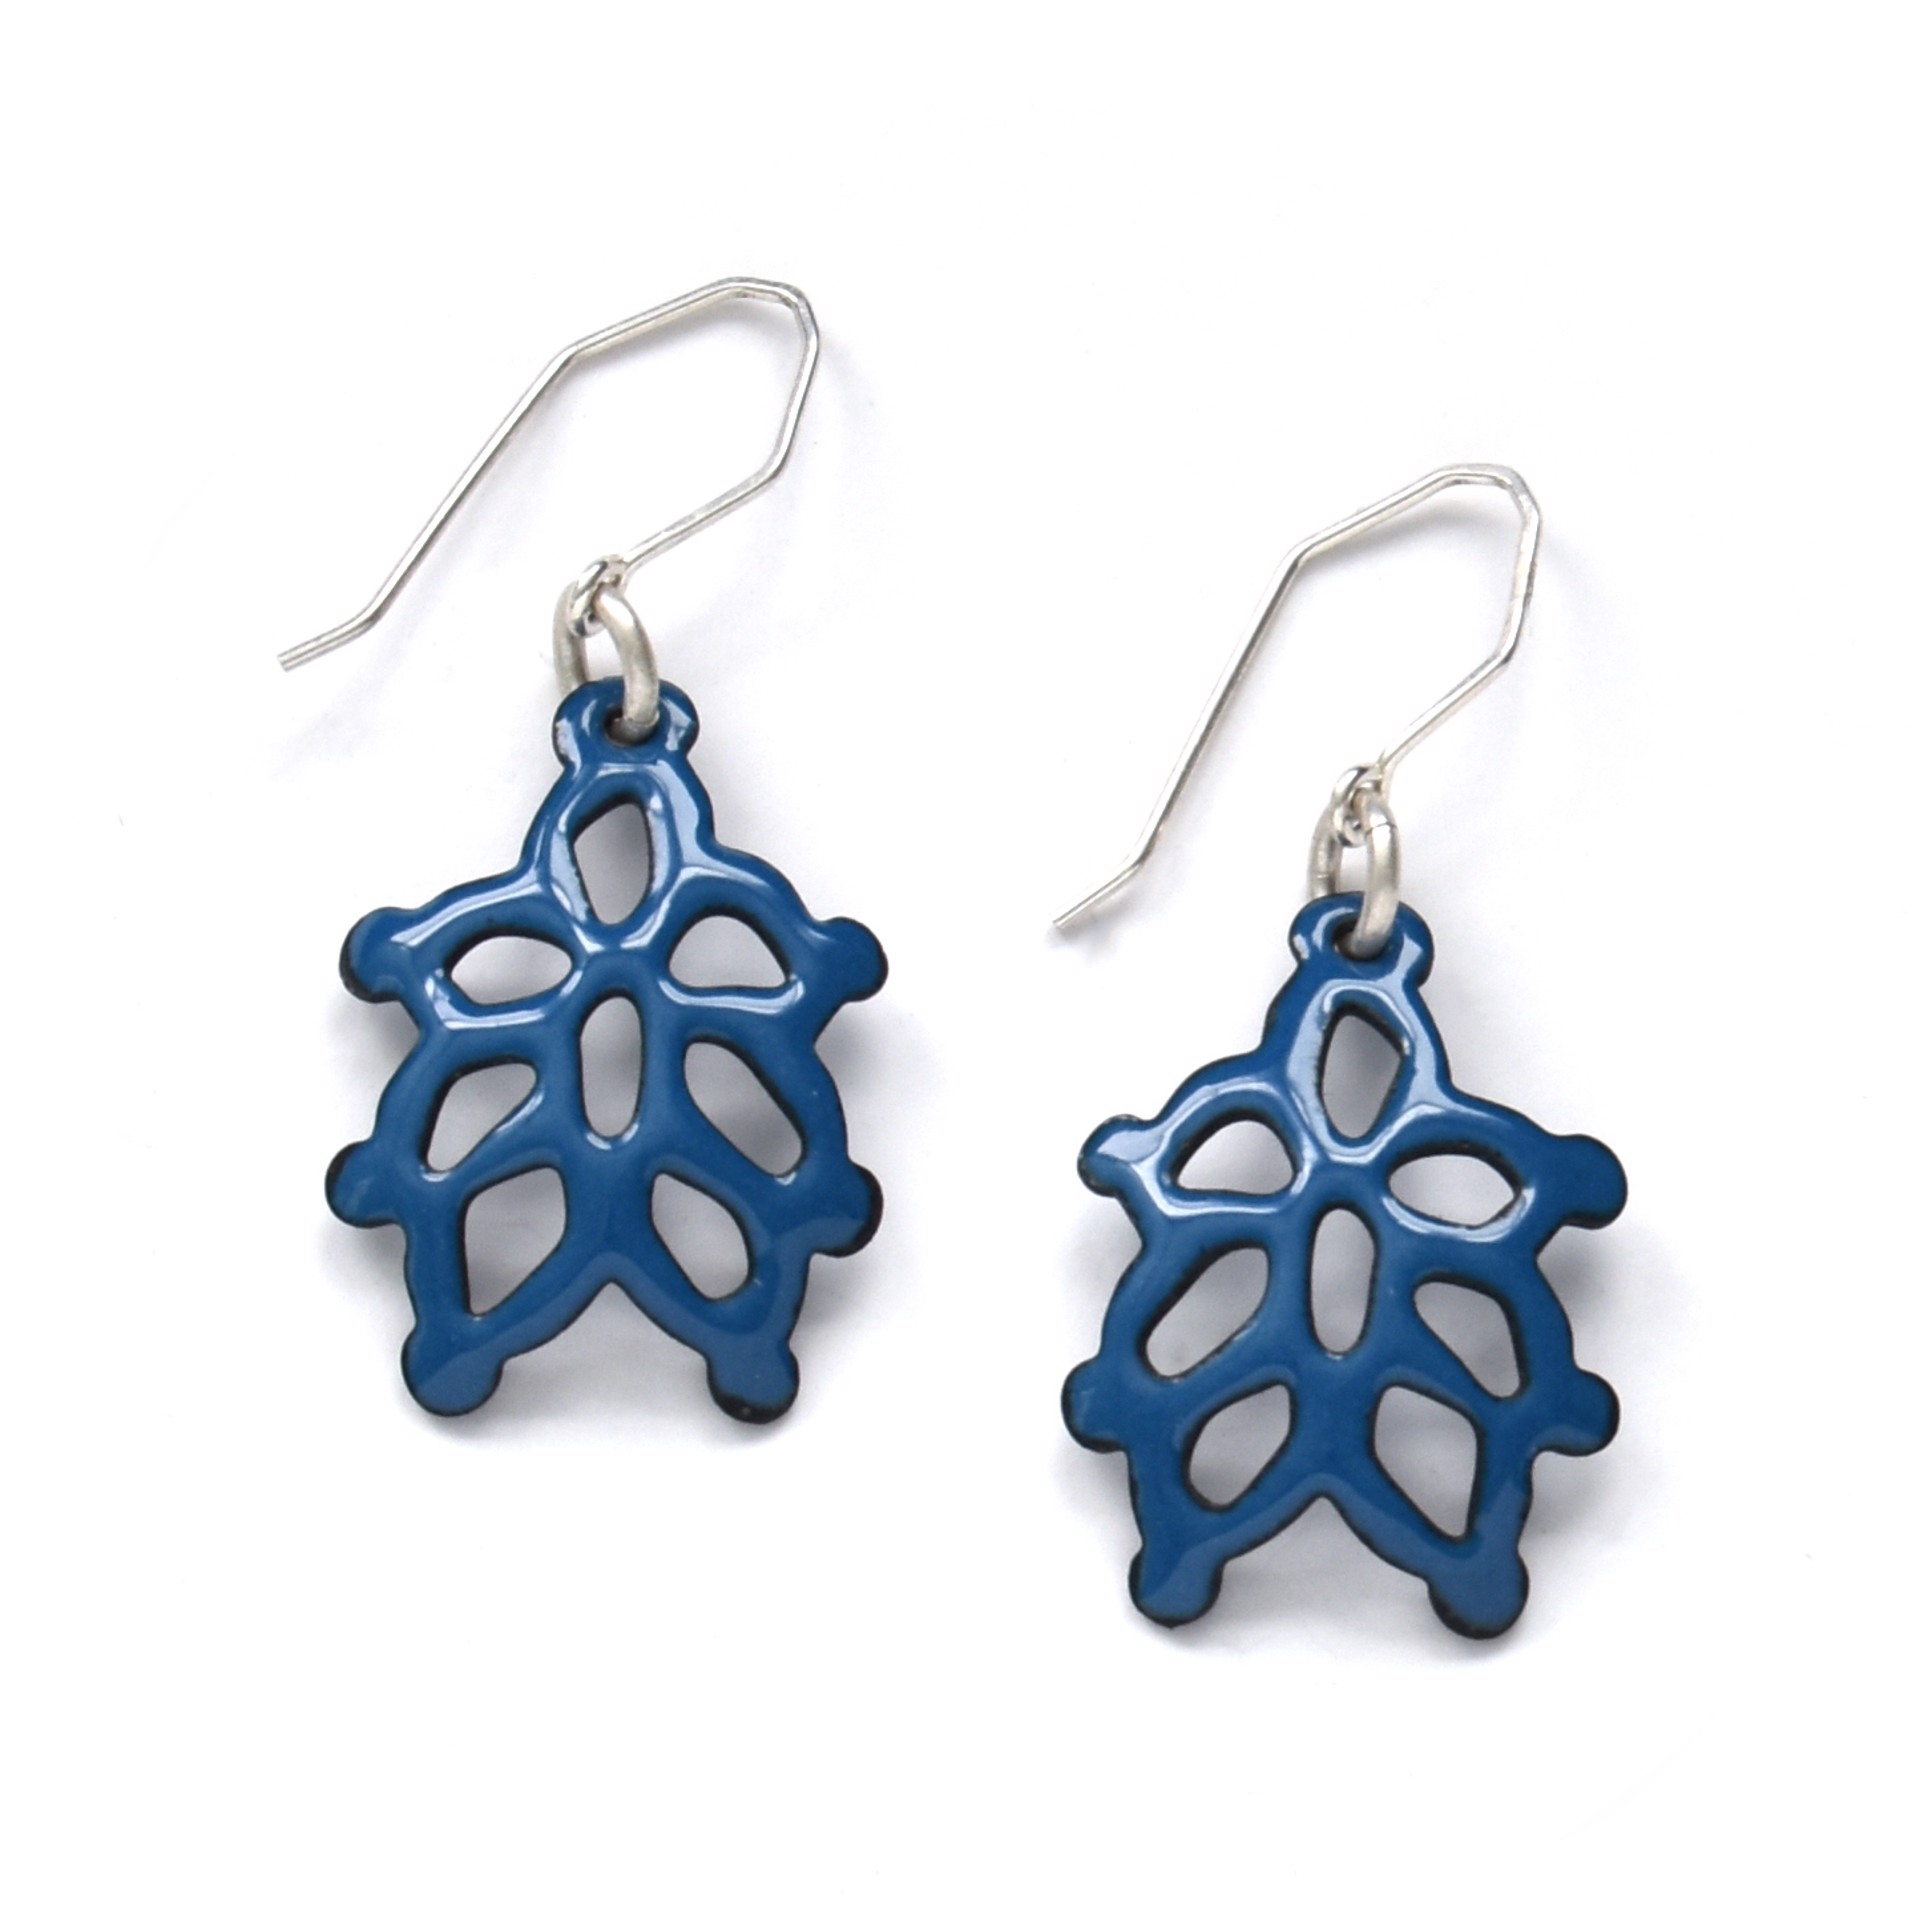 Lotus Structure Earrings by Joanna Nealey